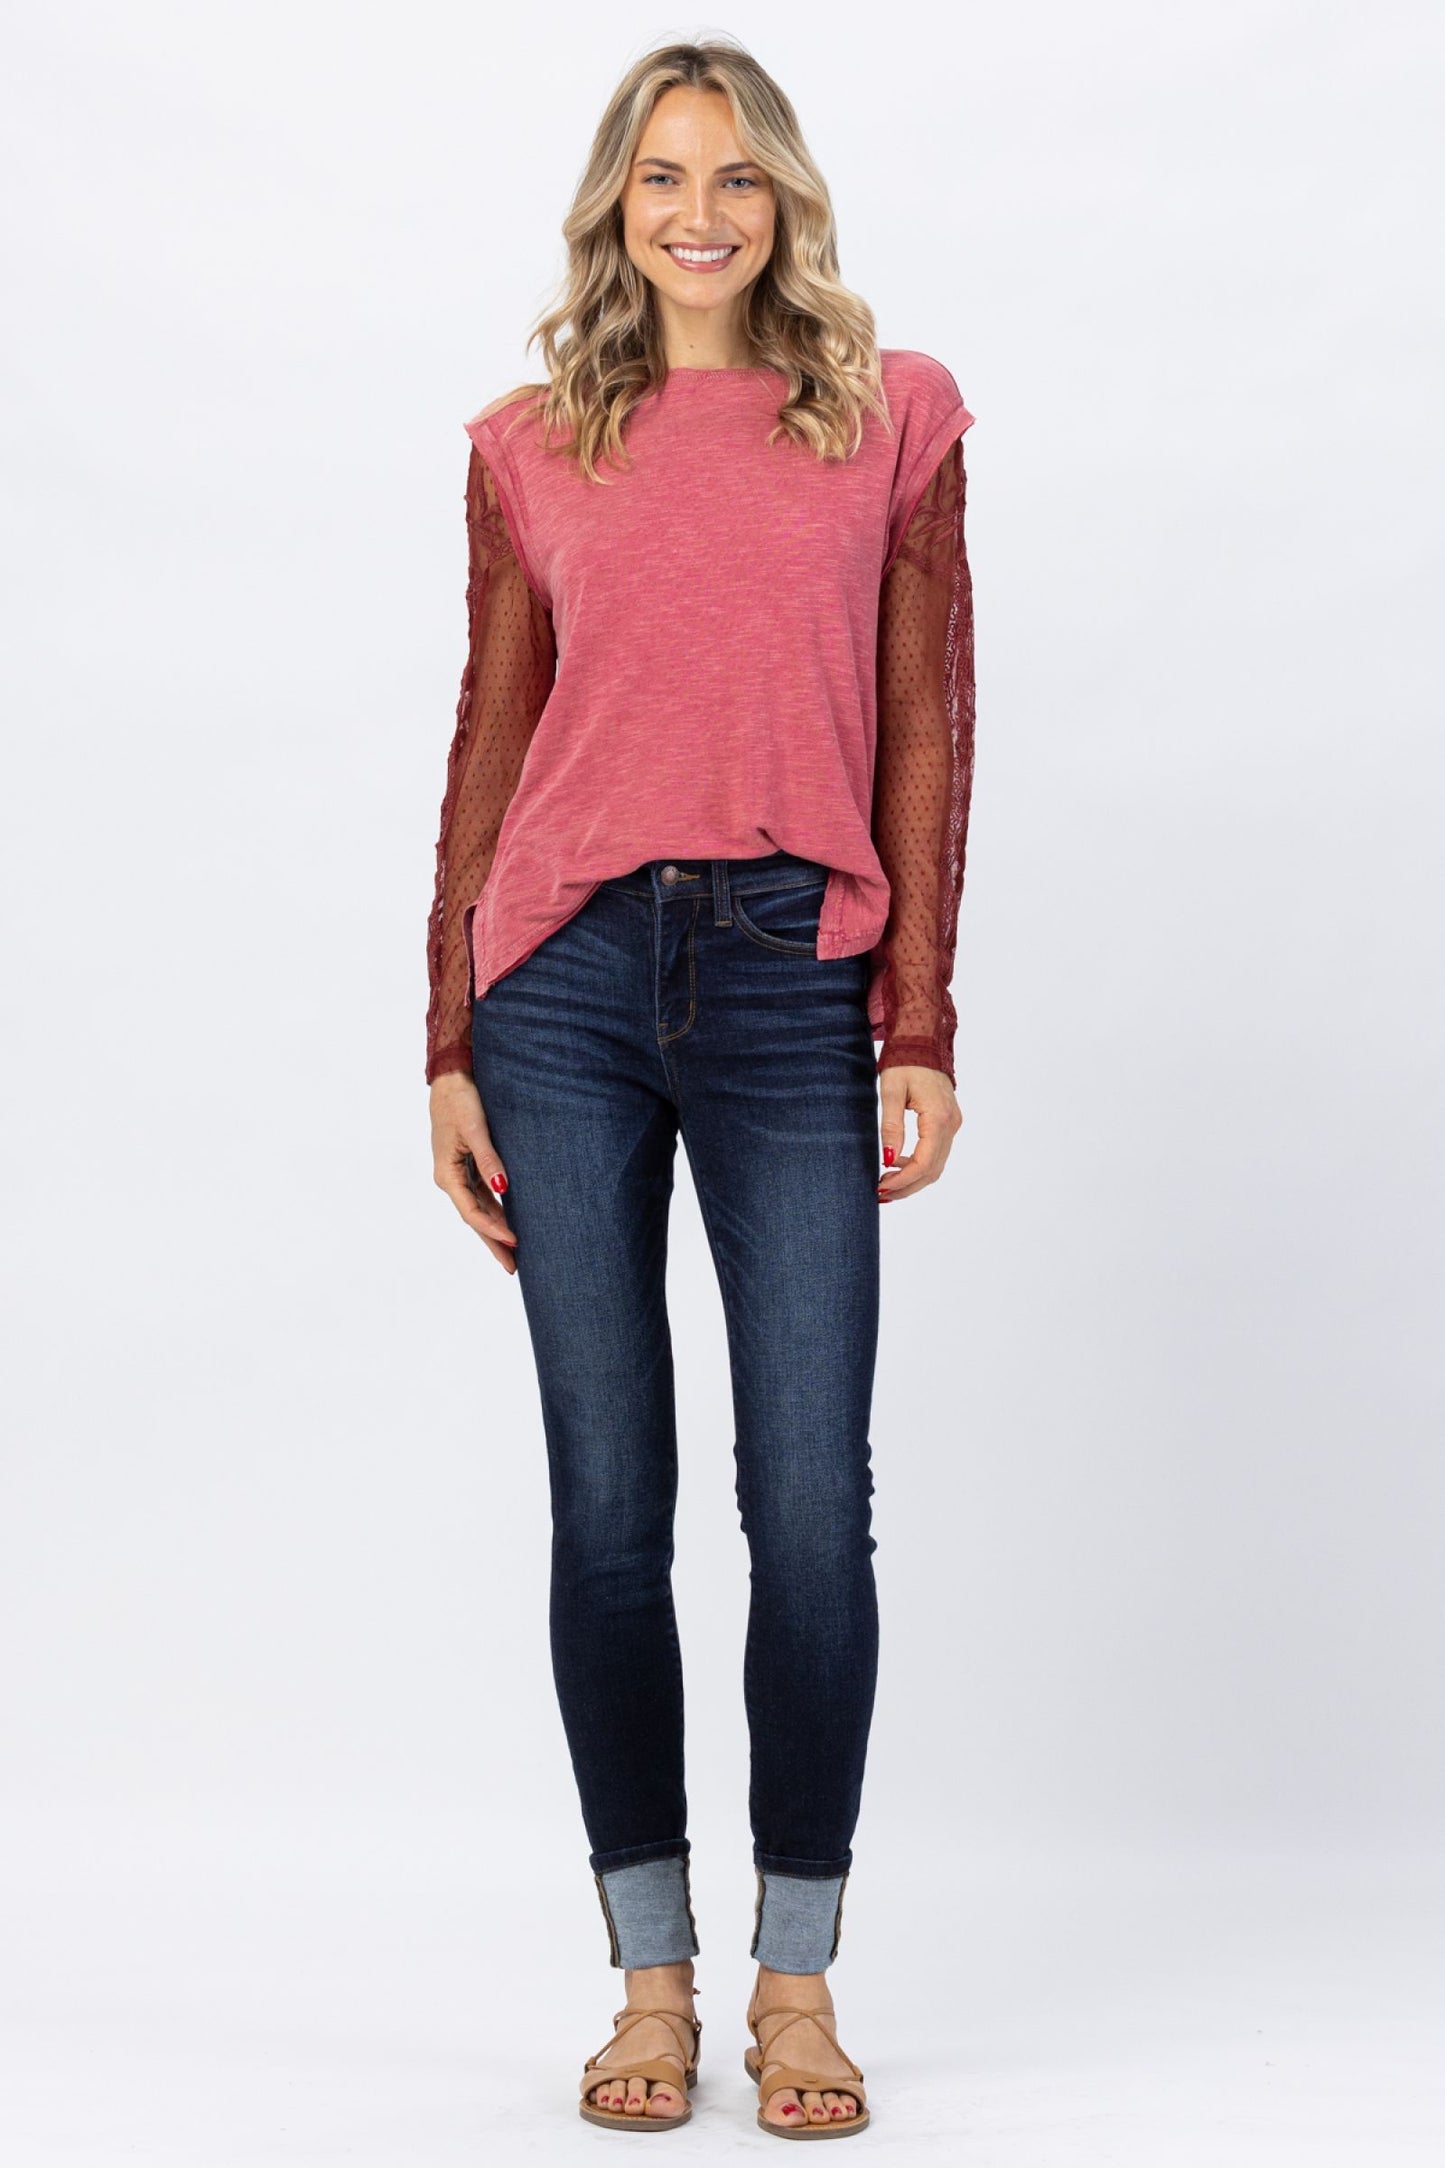 Judy Blue Mid Rise Long Inseam Jeans